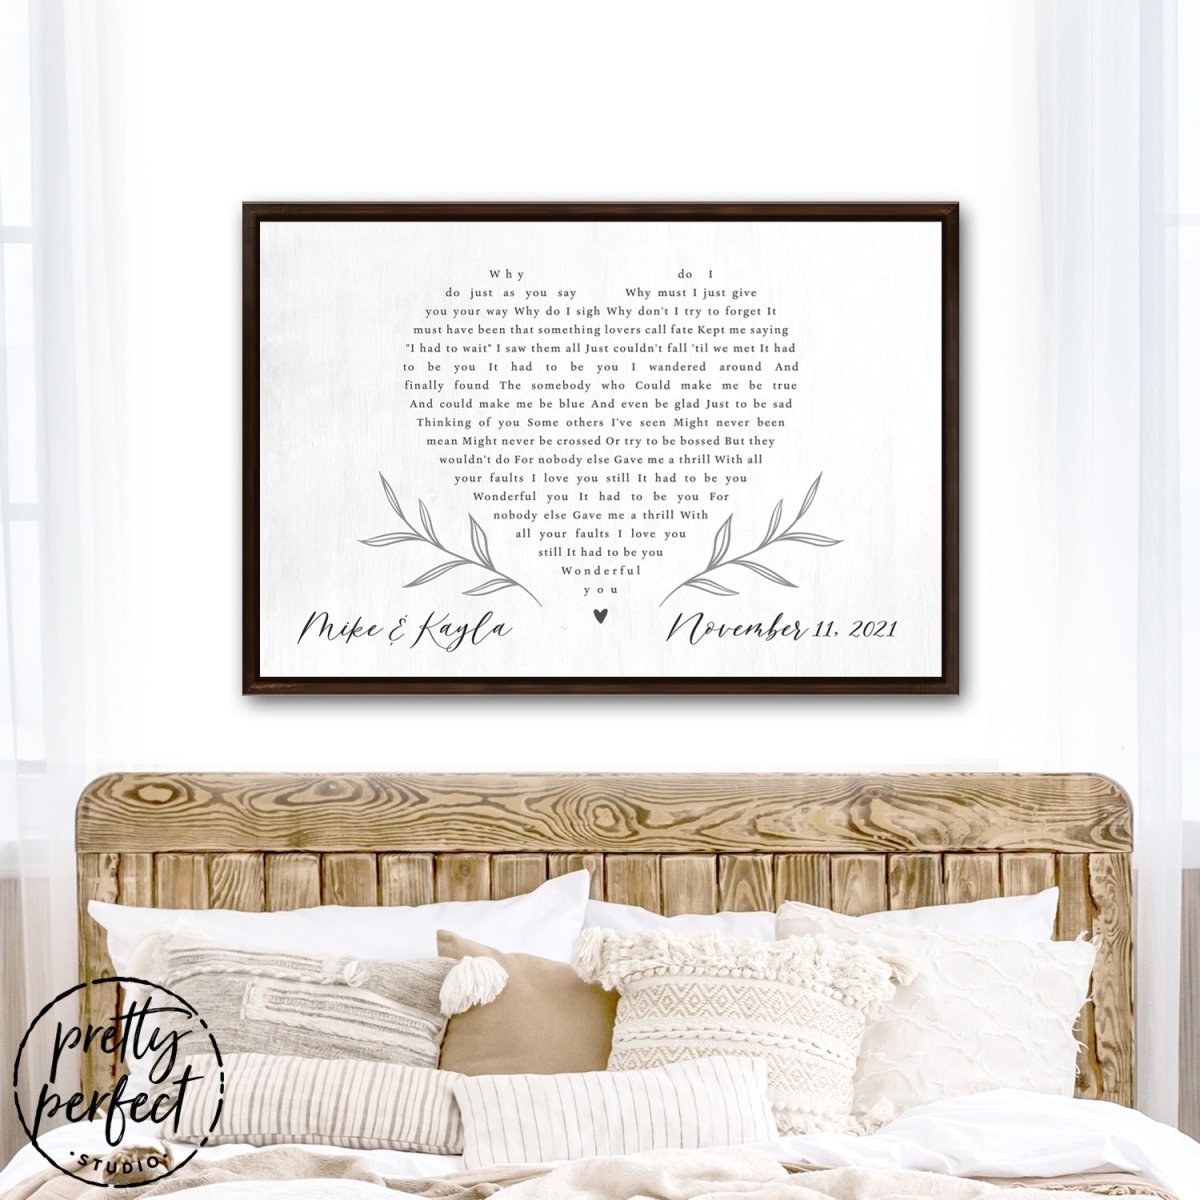 Personalized Wedding Song on Canvas above bed - Pretty Perfect Studio